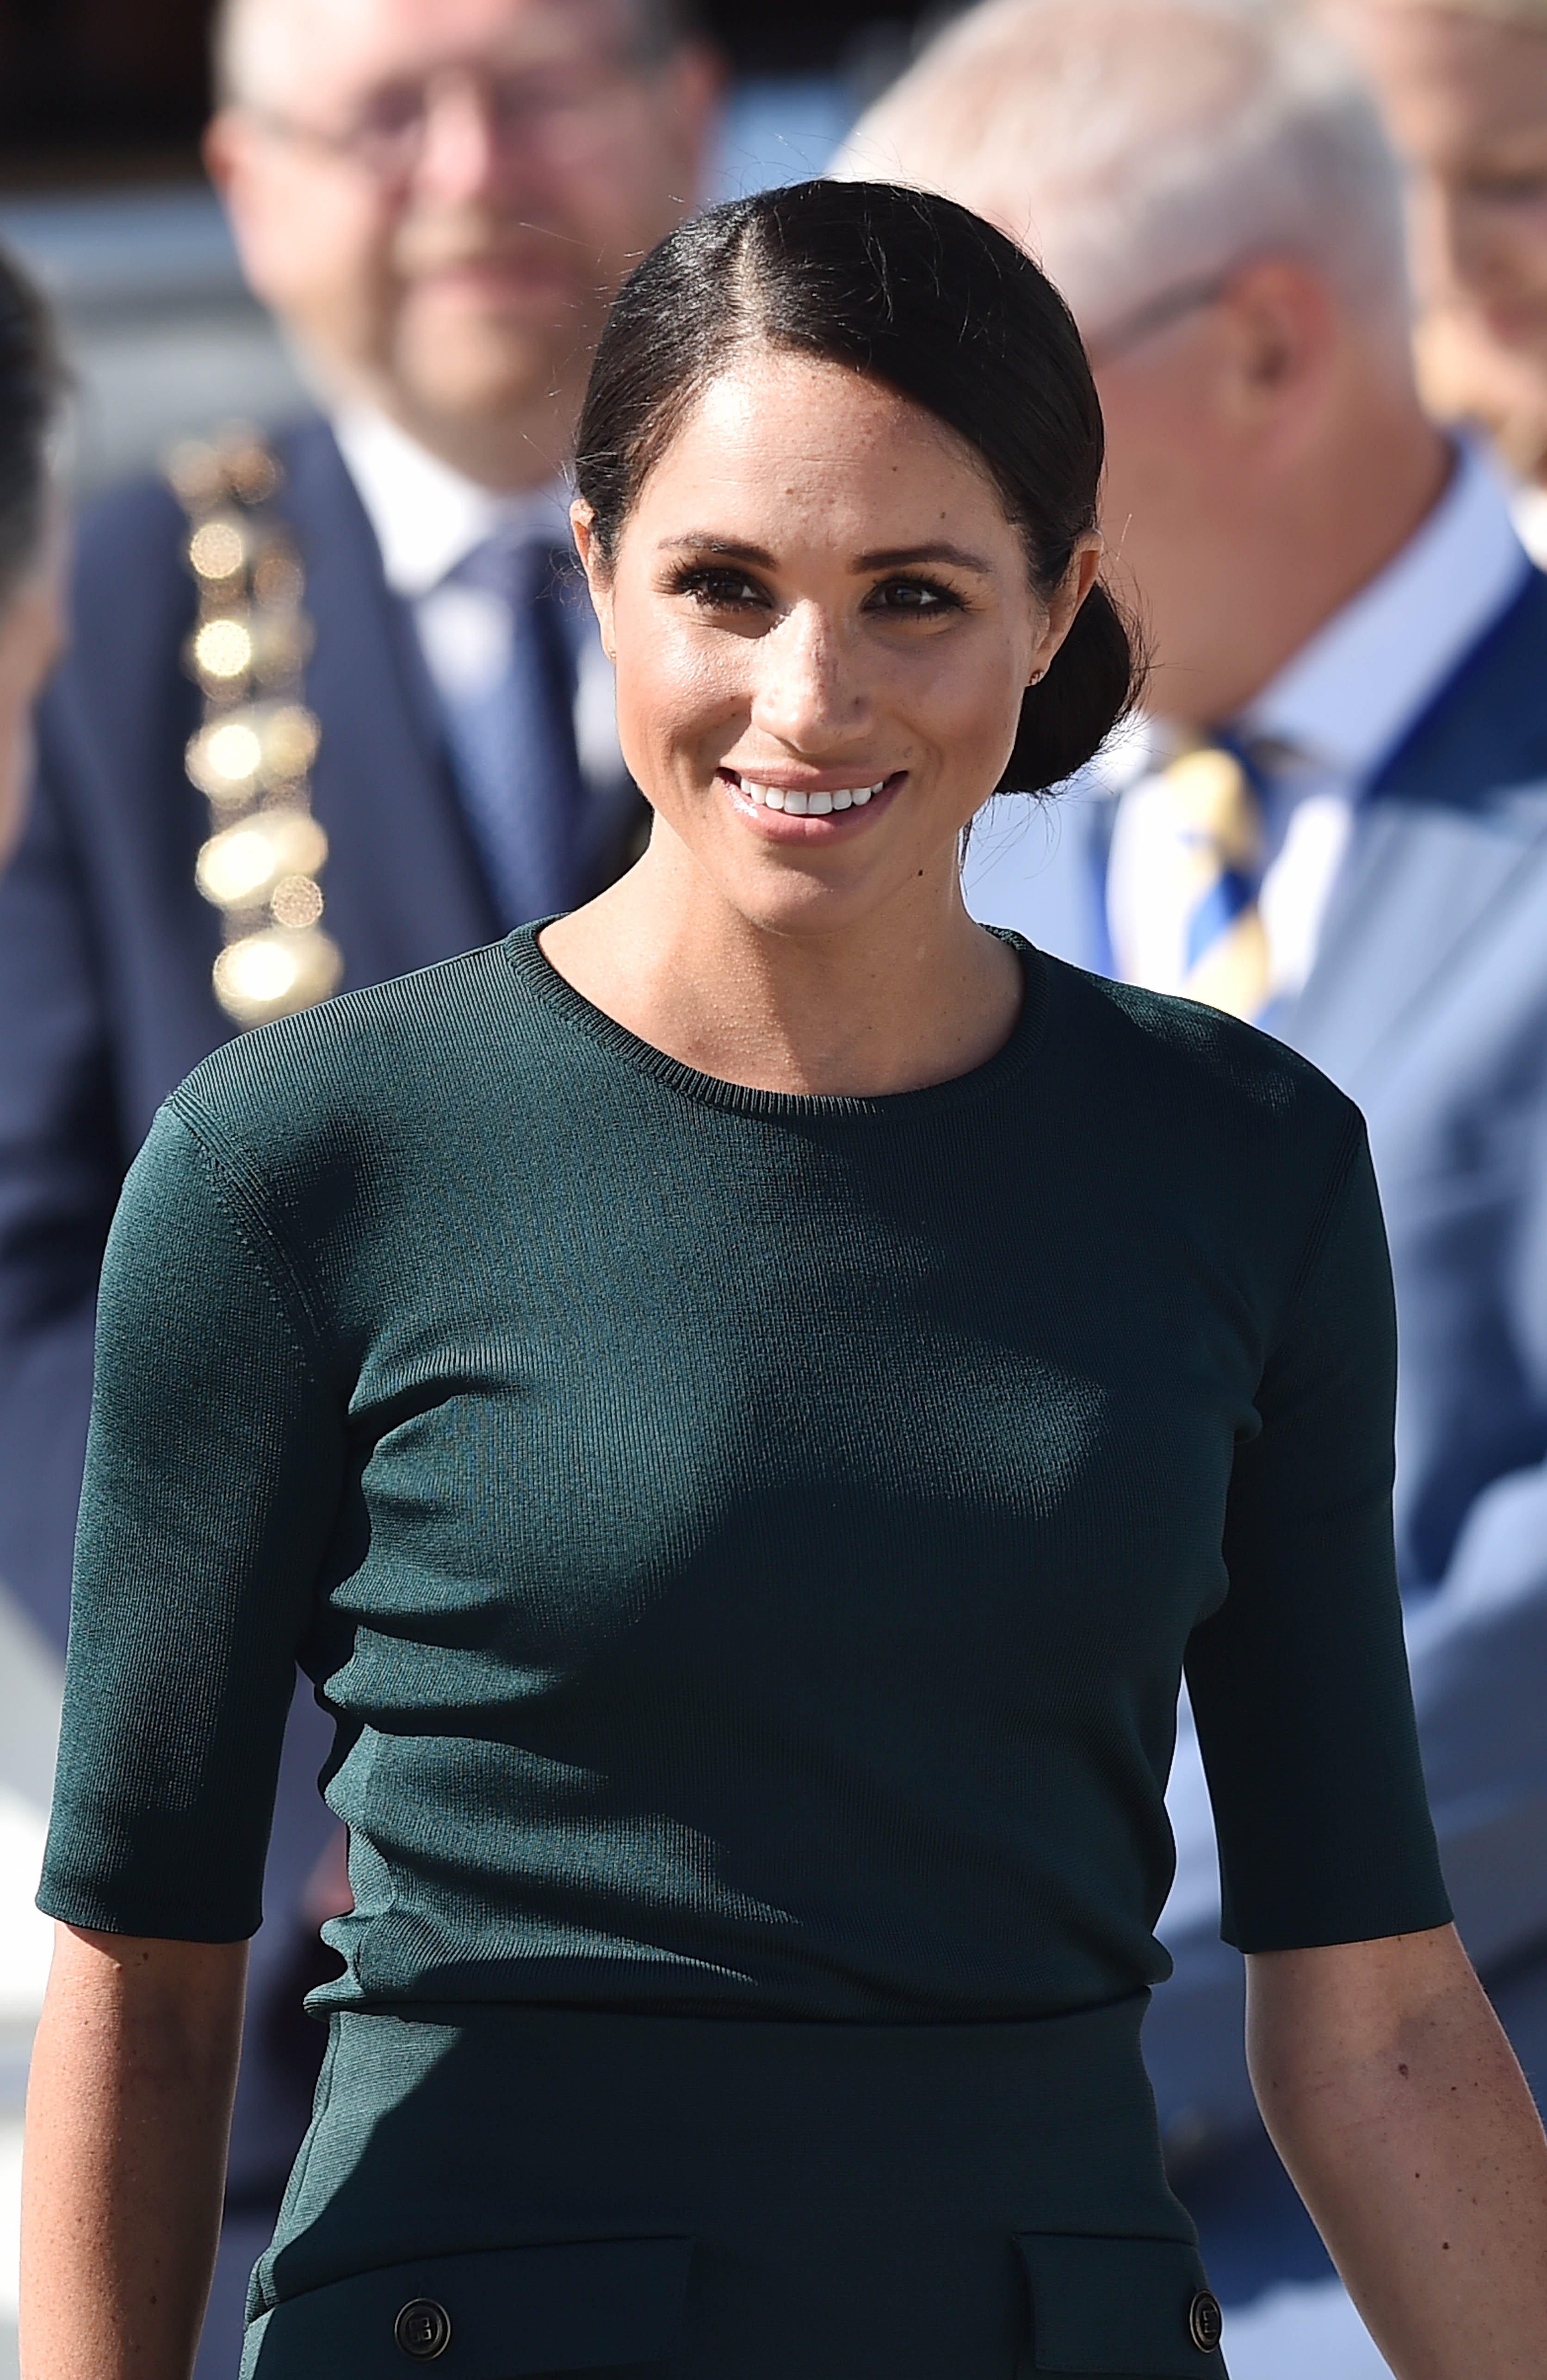 Meghan, Duchess of Sussex at Dublin city airport in Ireland on July 10, 2018 | Photo: Getty Images